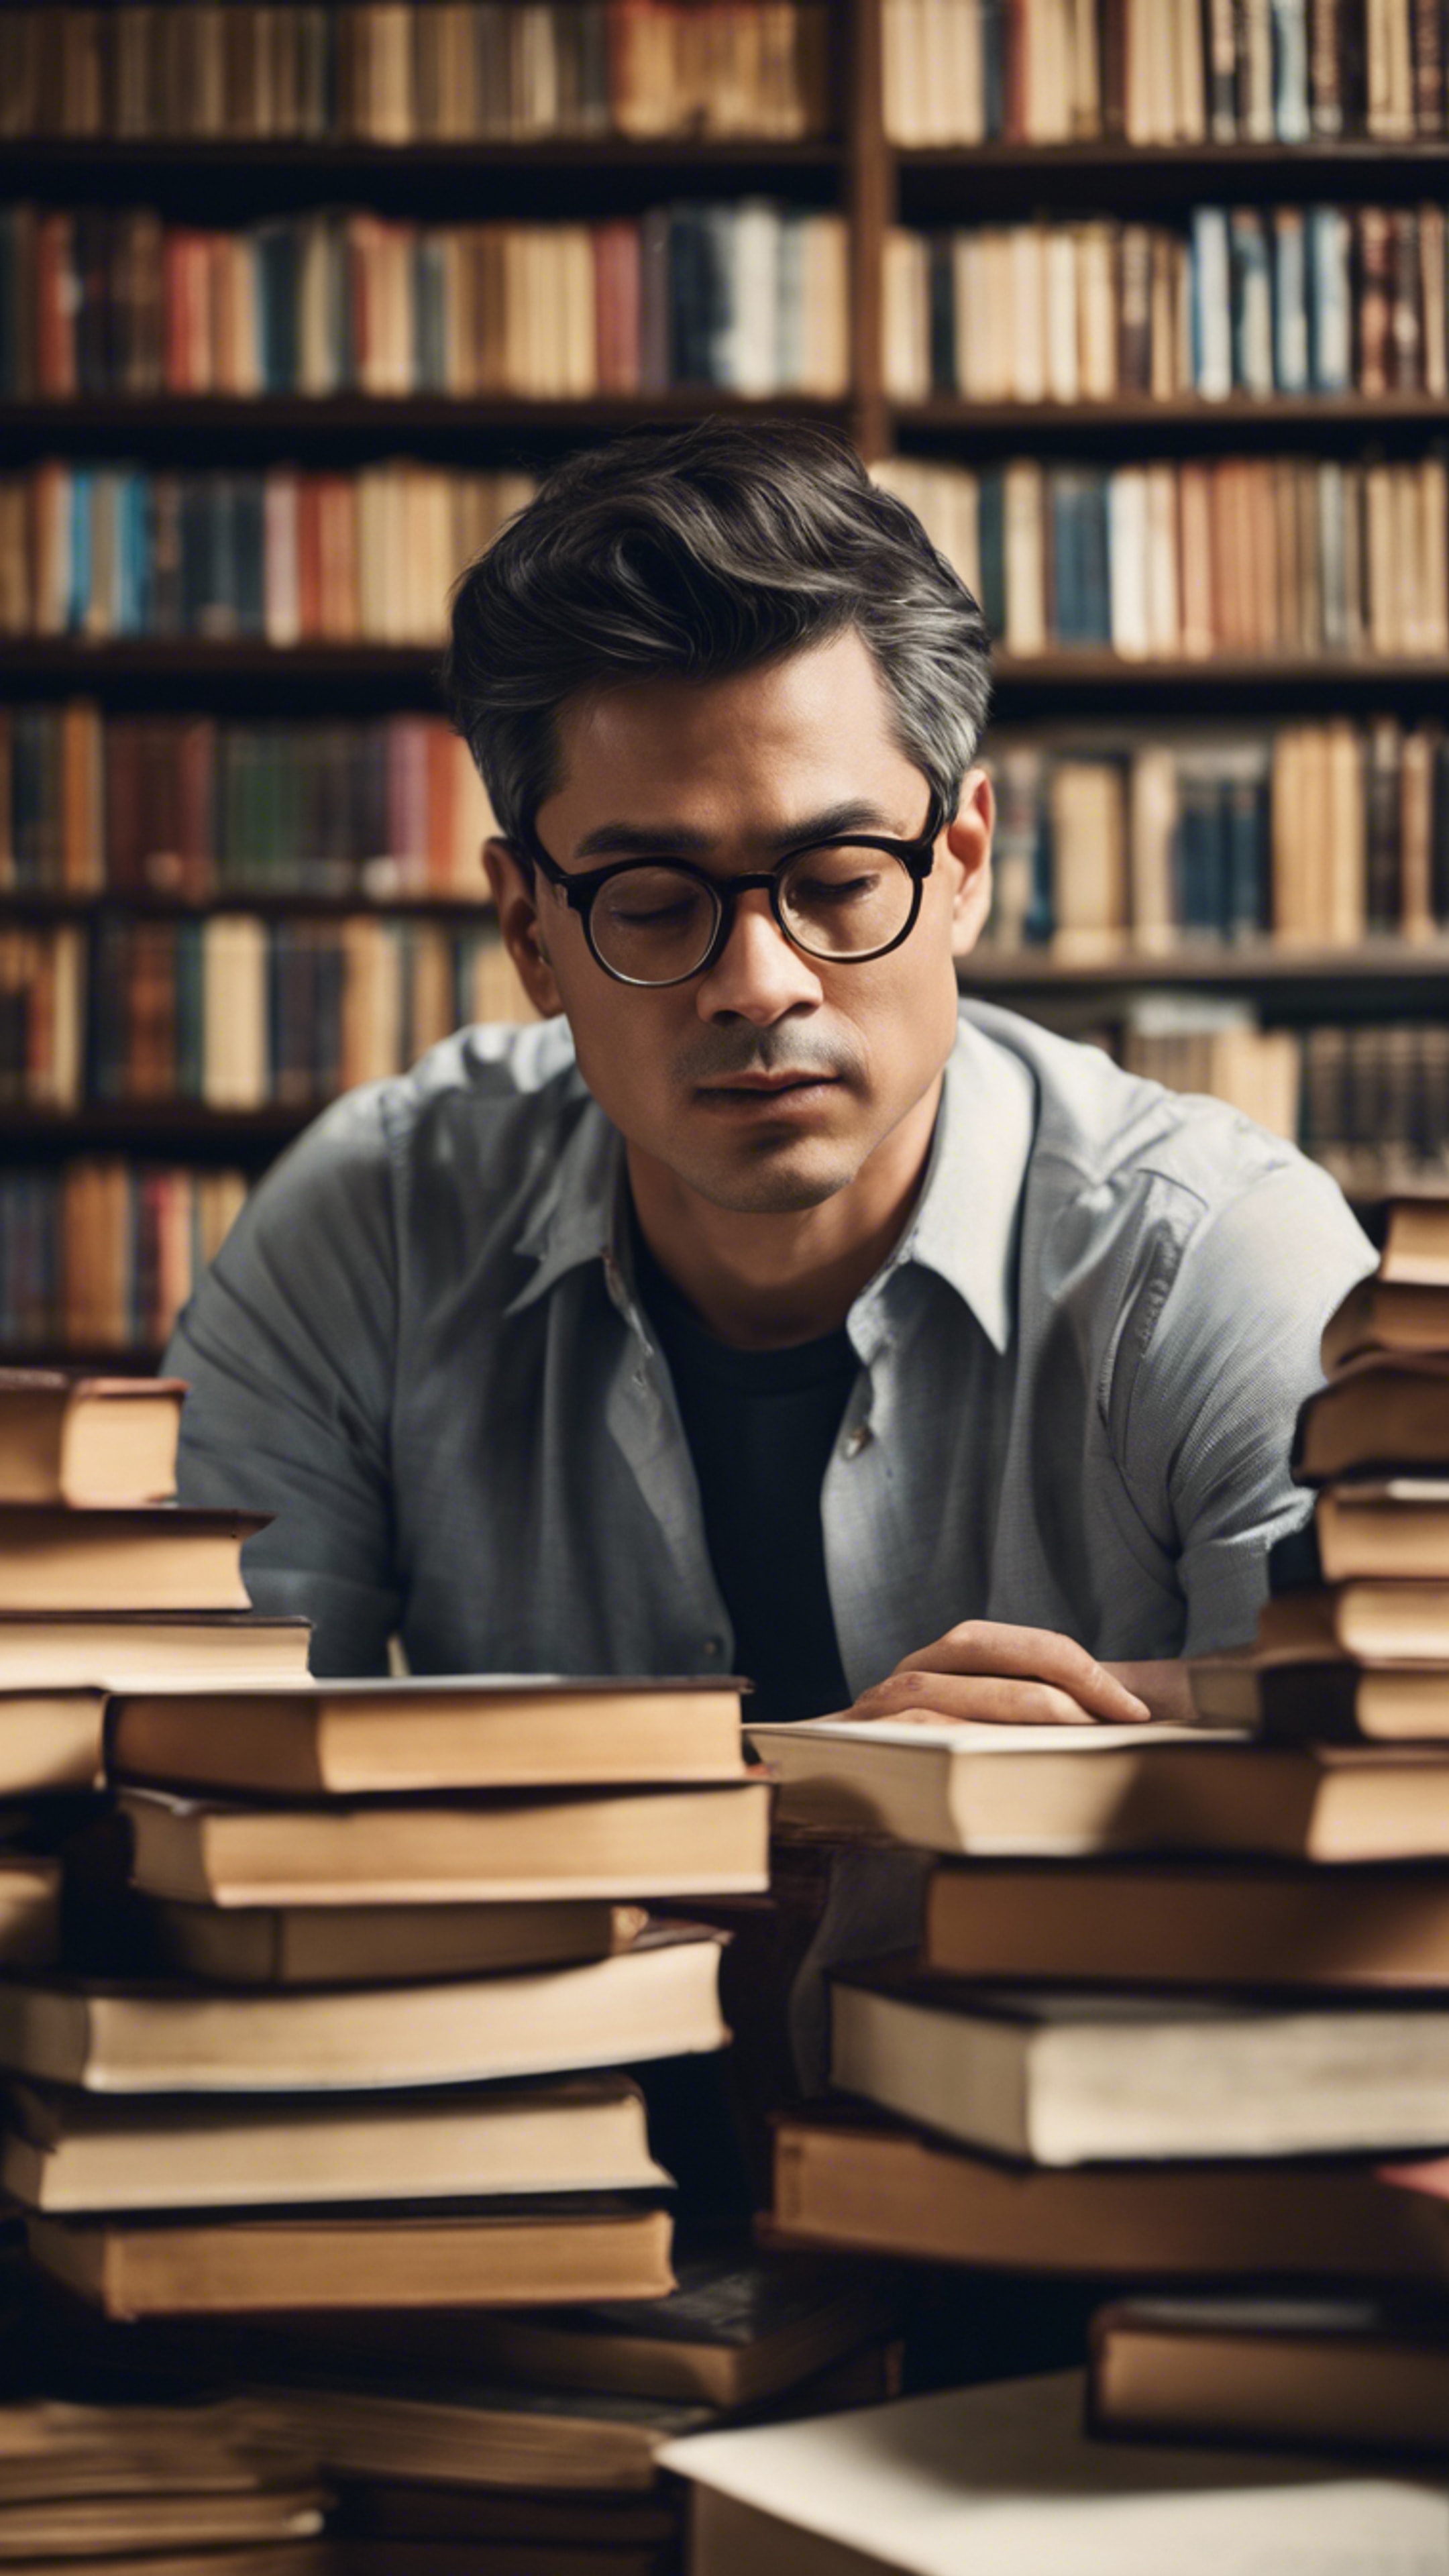 An intelligent man in glasses, deeply engrossed in his studies surrounded by stacks of books in a quiet library. Taustakuva[88f4531613da45079a41]